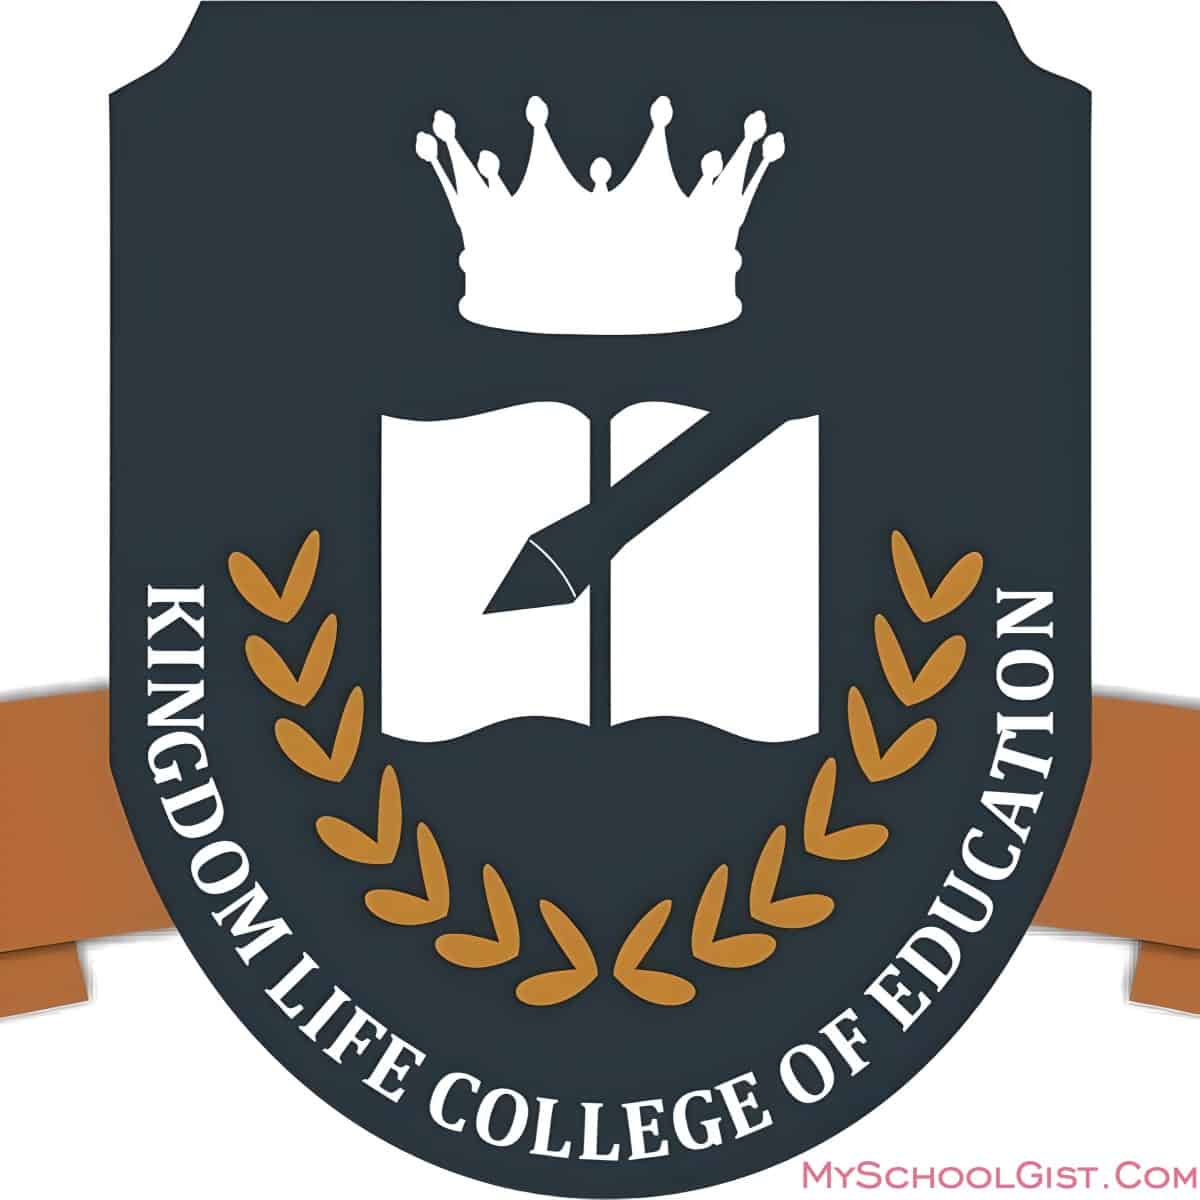 Kingdom Life College of Education's Tuition-Free Scholarship Programme